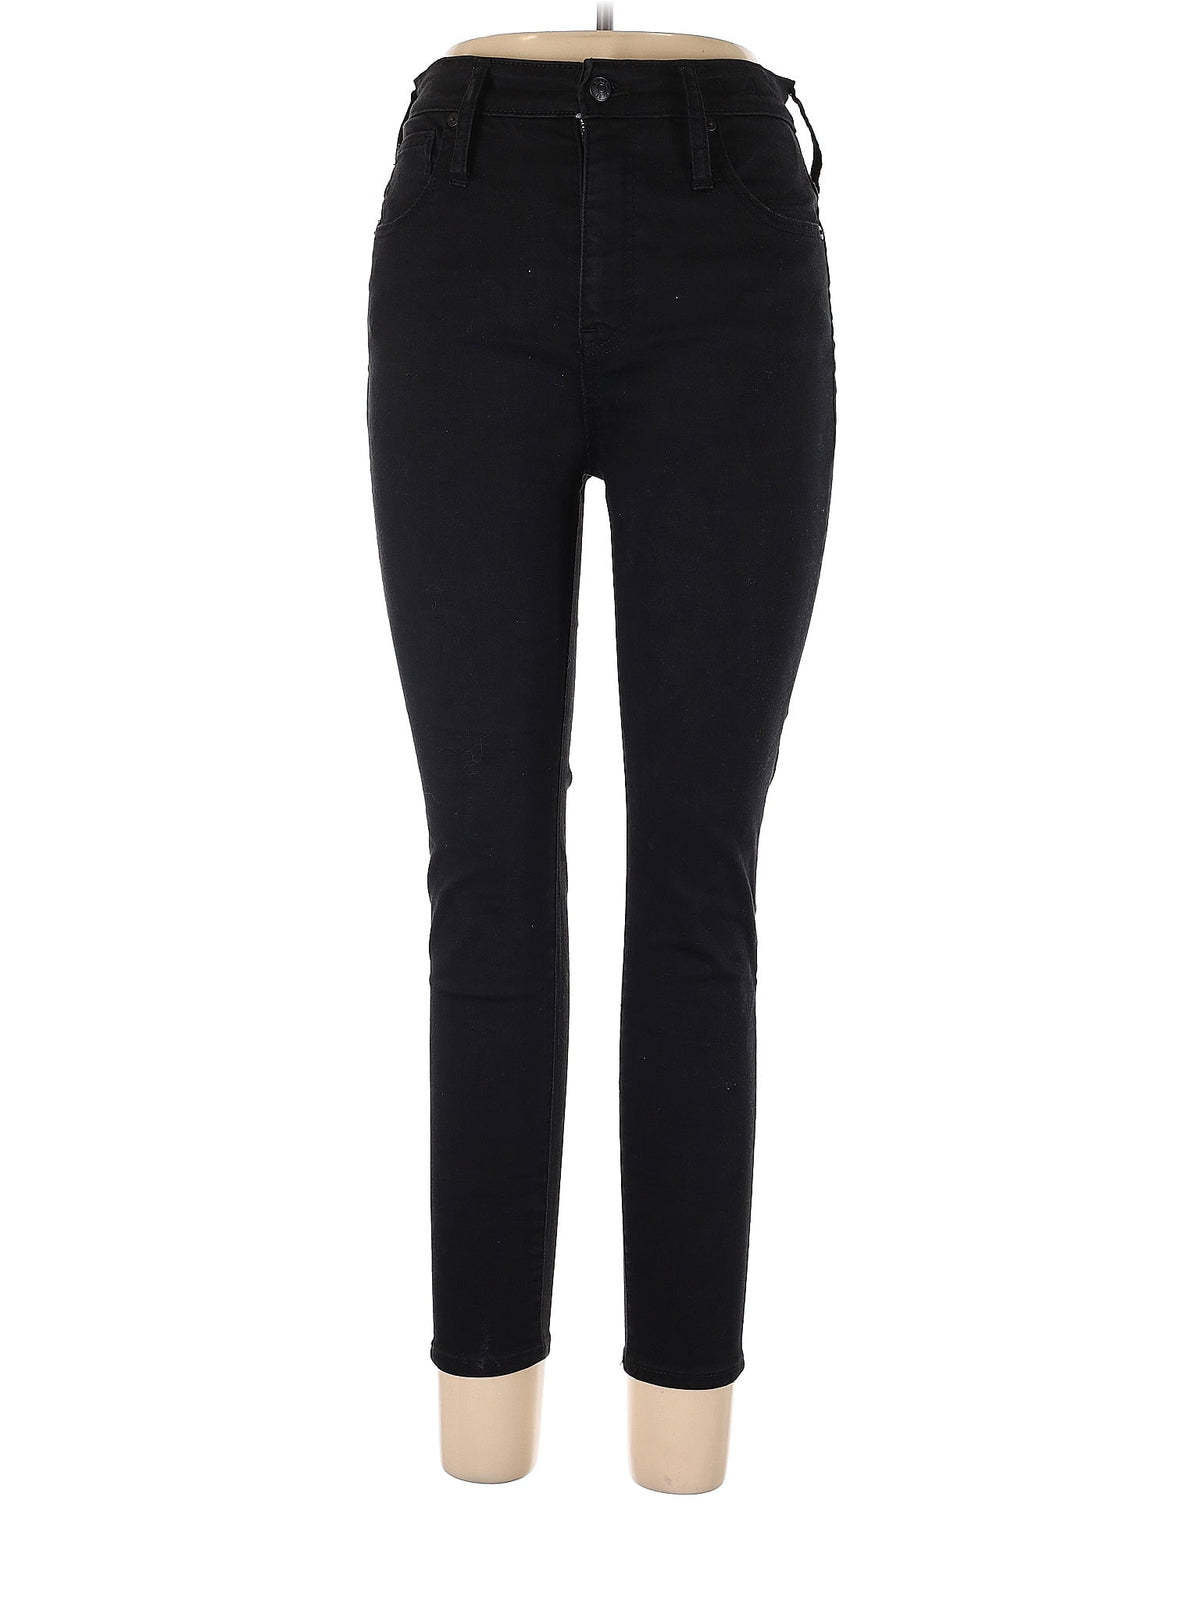 Low-Rise Skinny Jeans in Dark Wash waist size - 30 P